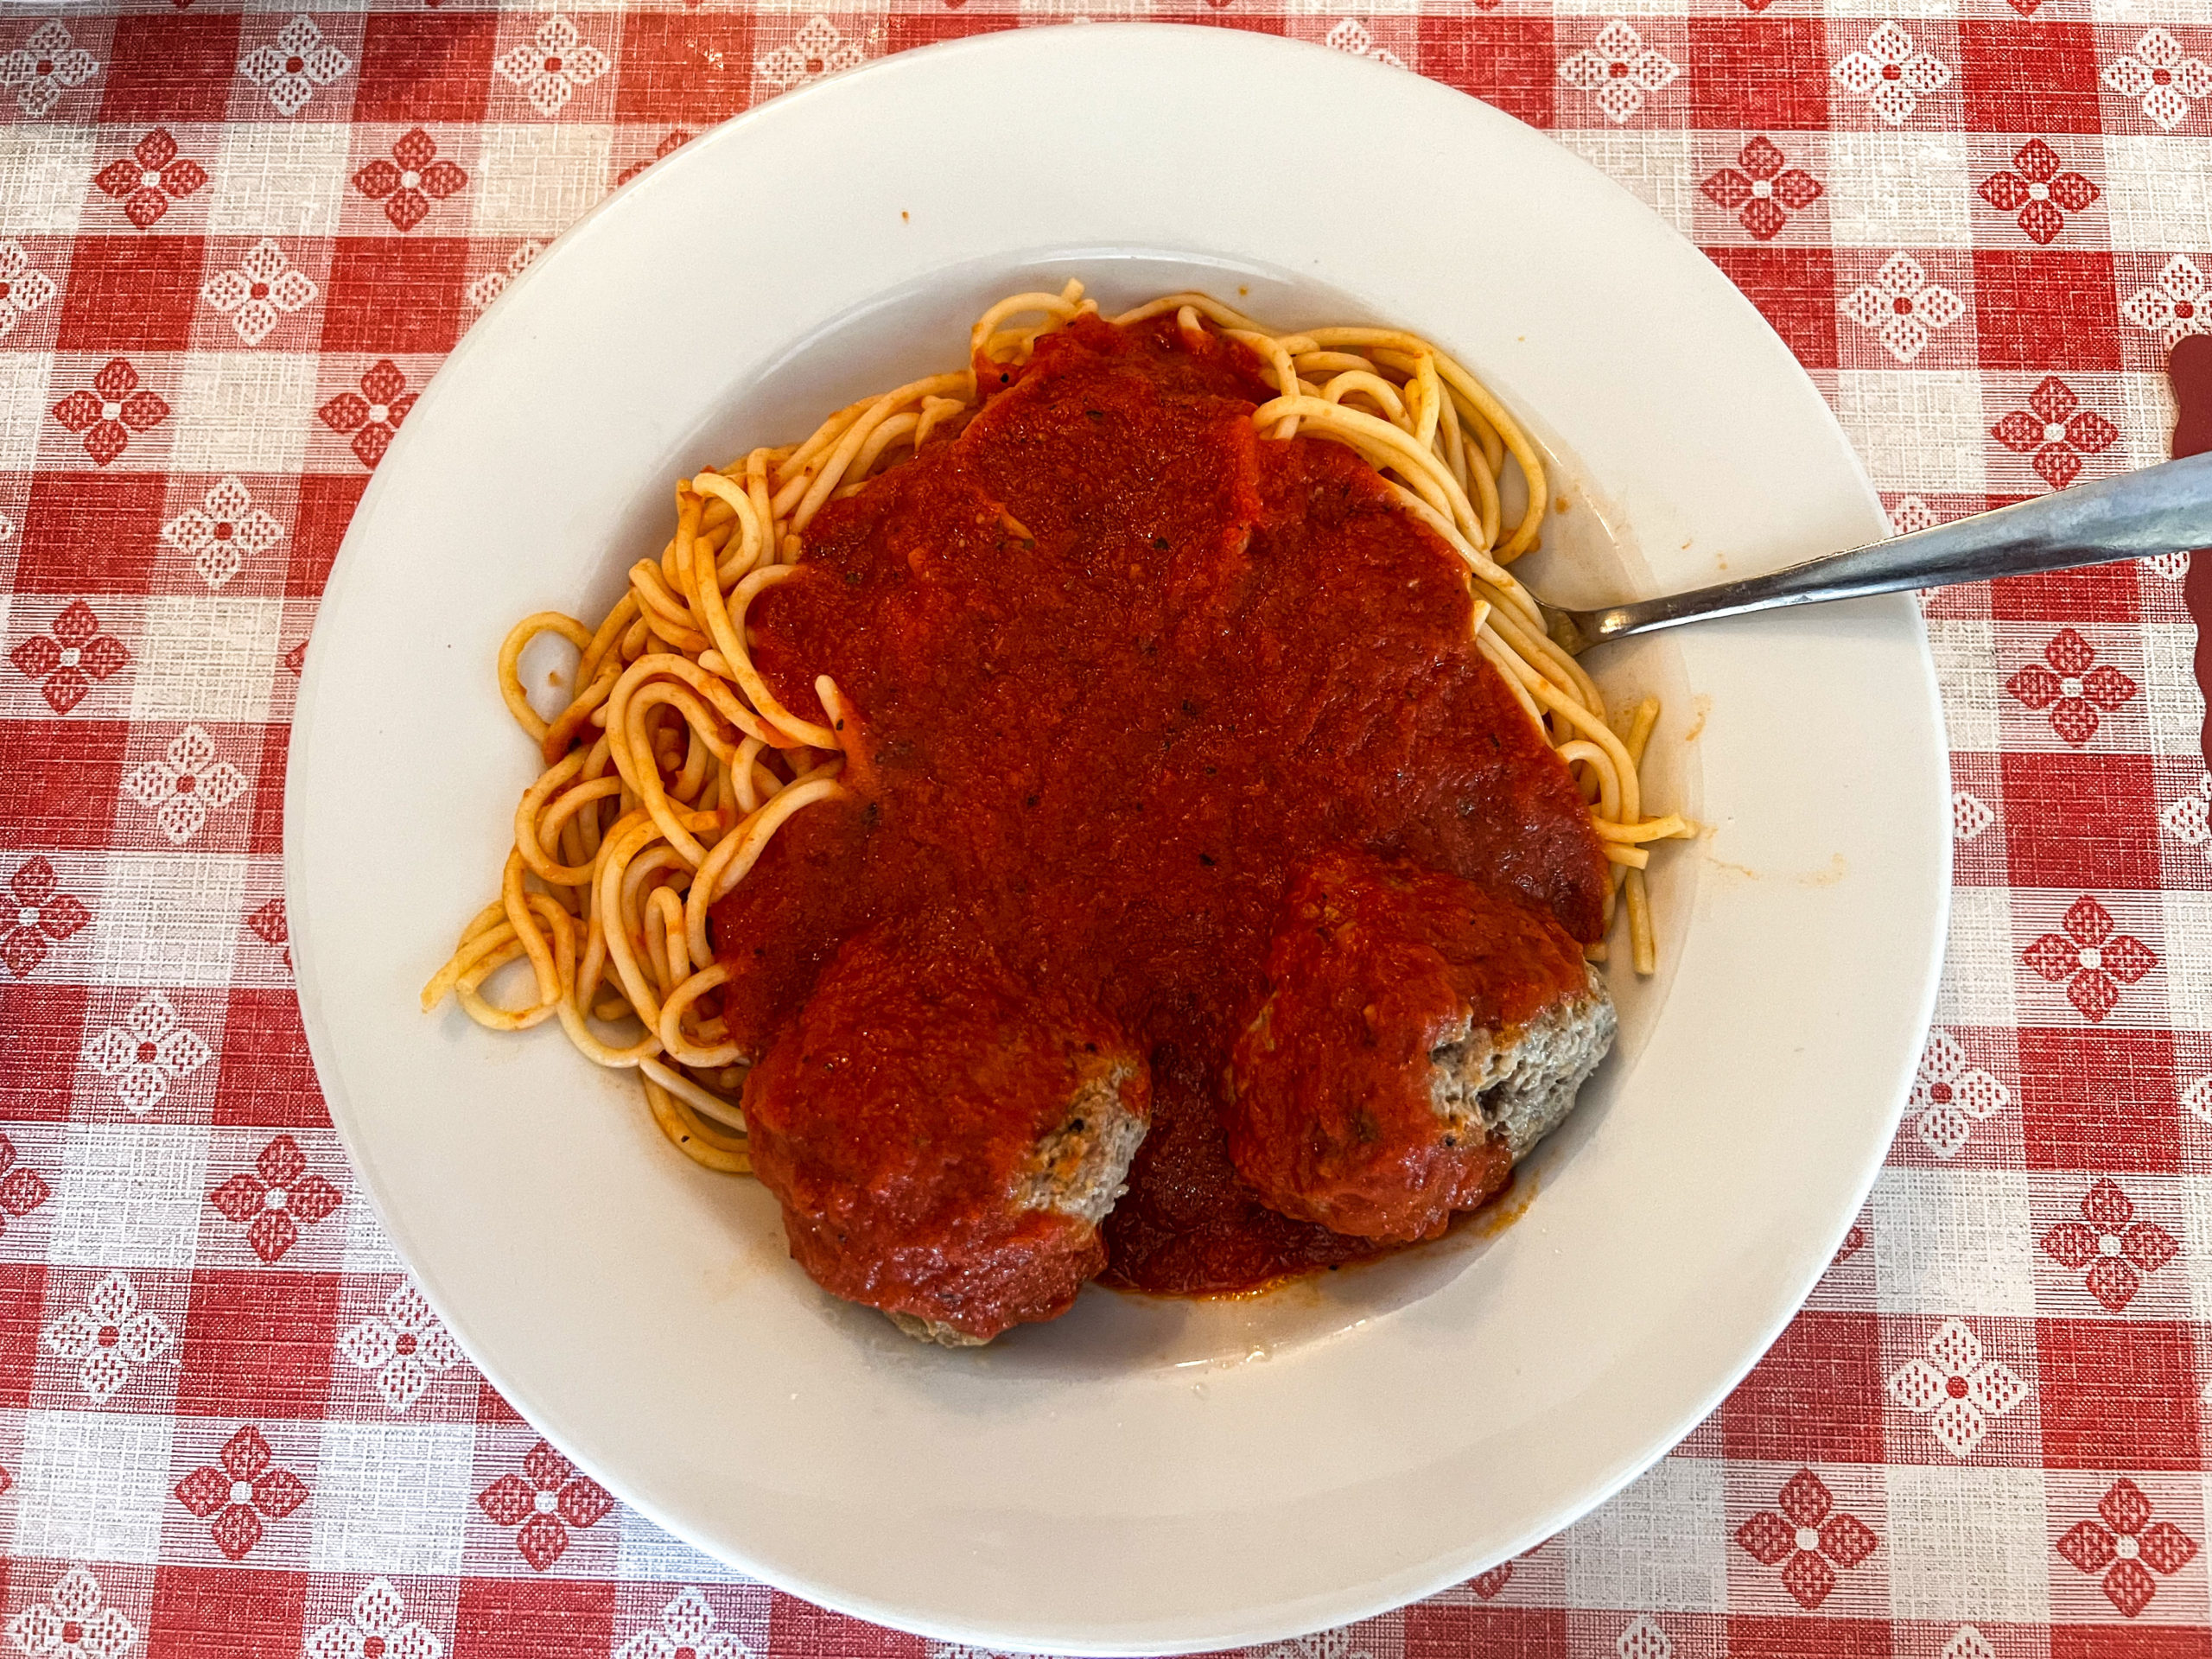 The spaghetti and meatballs at Italian Touch - some of the best around.